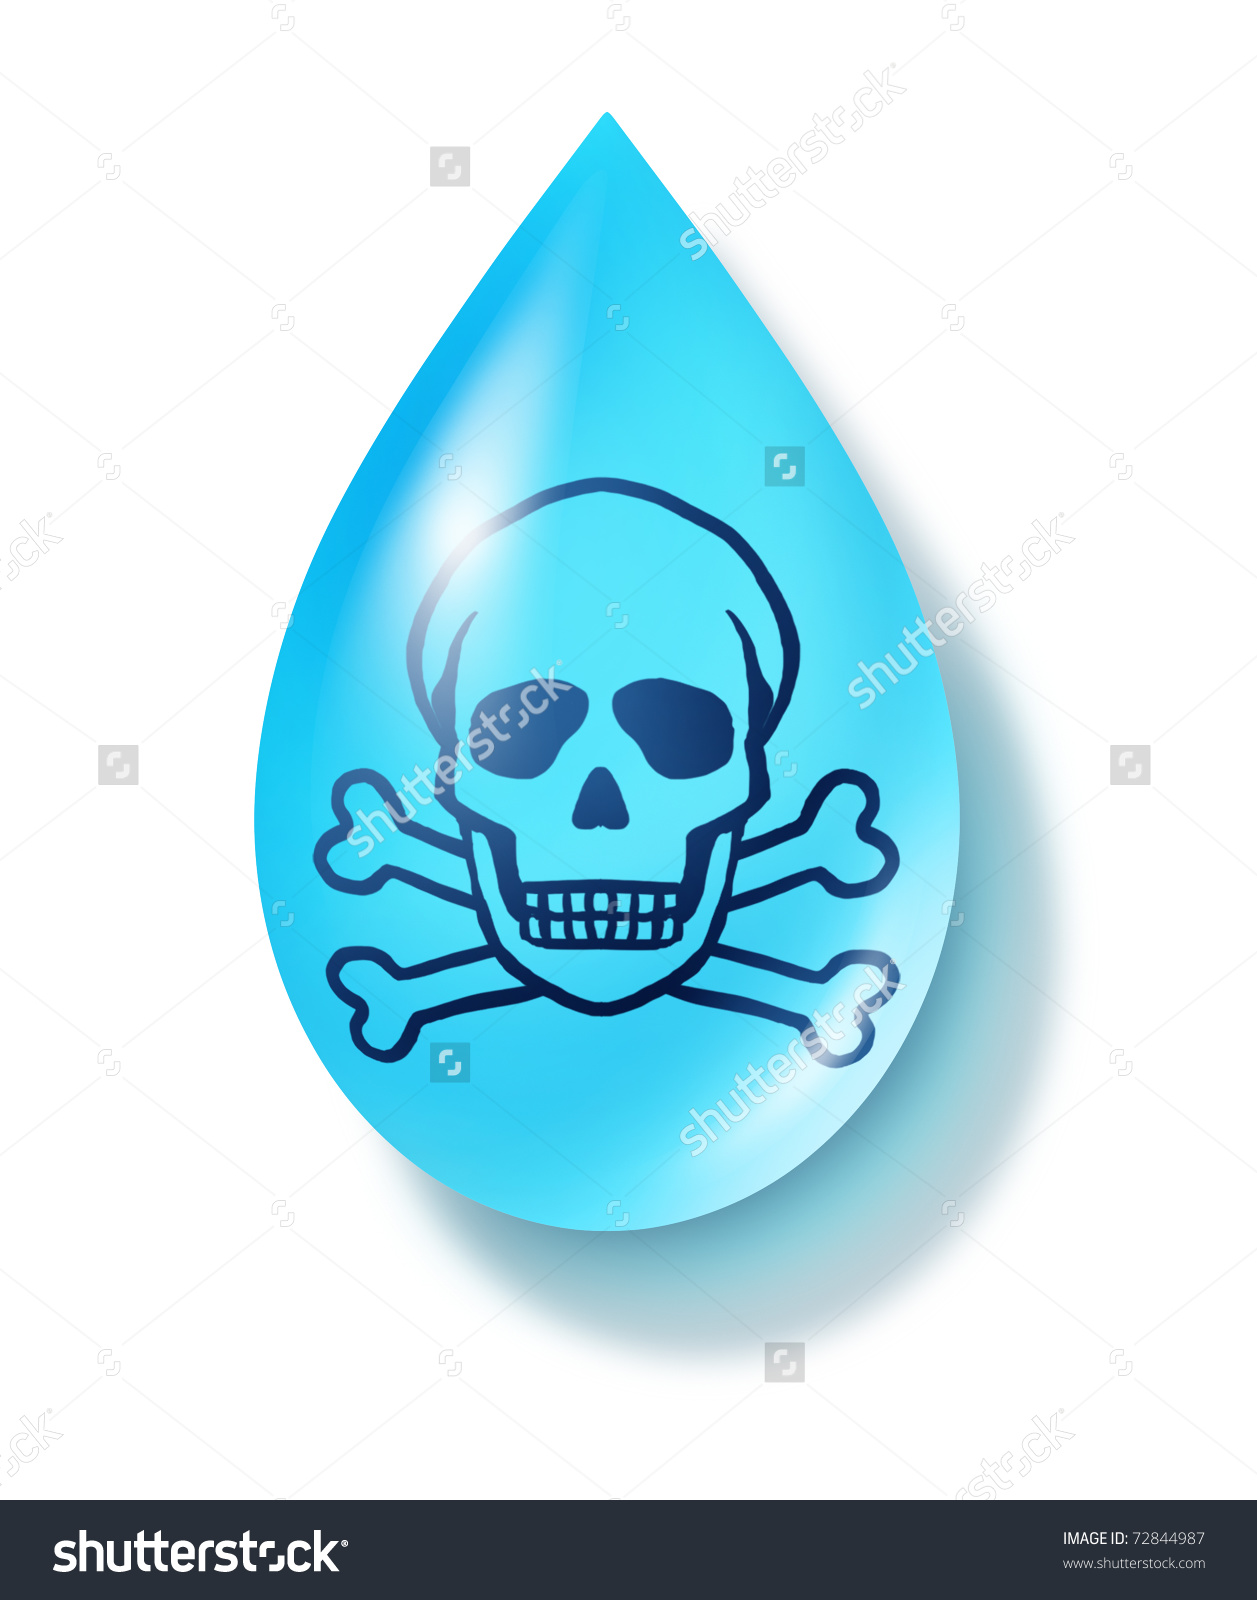 Contaminated Water Clipart.